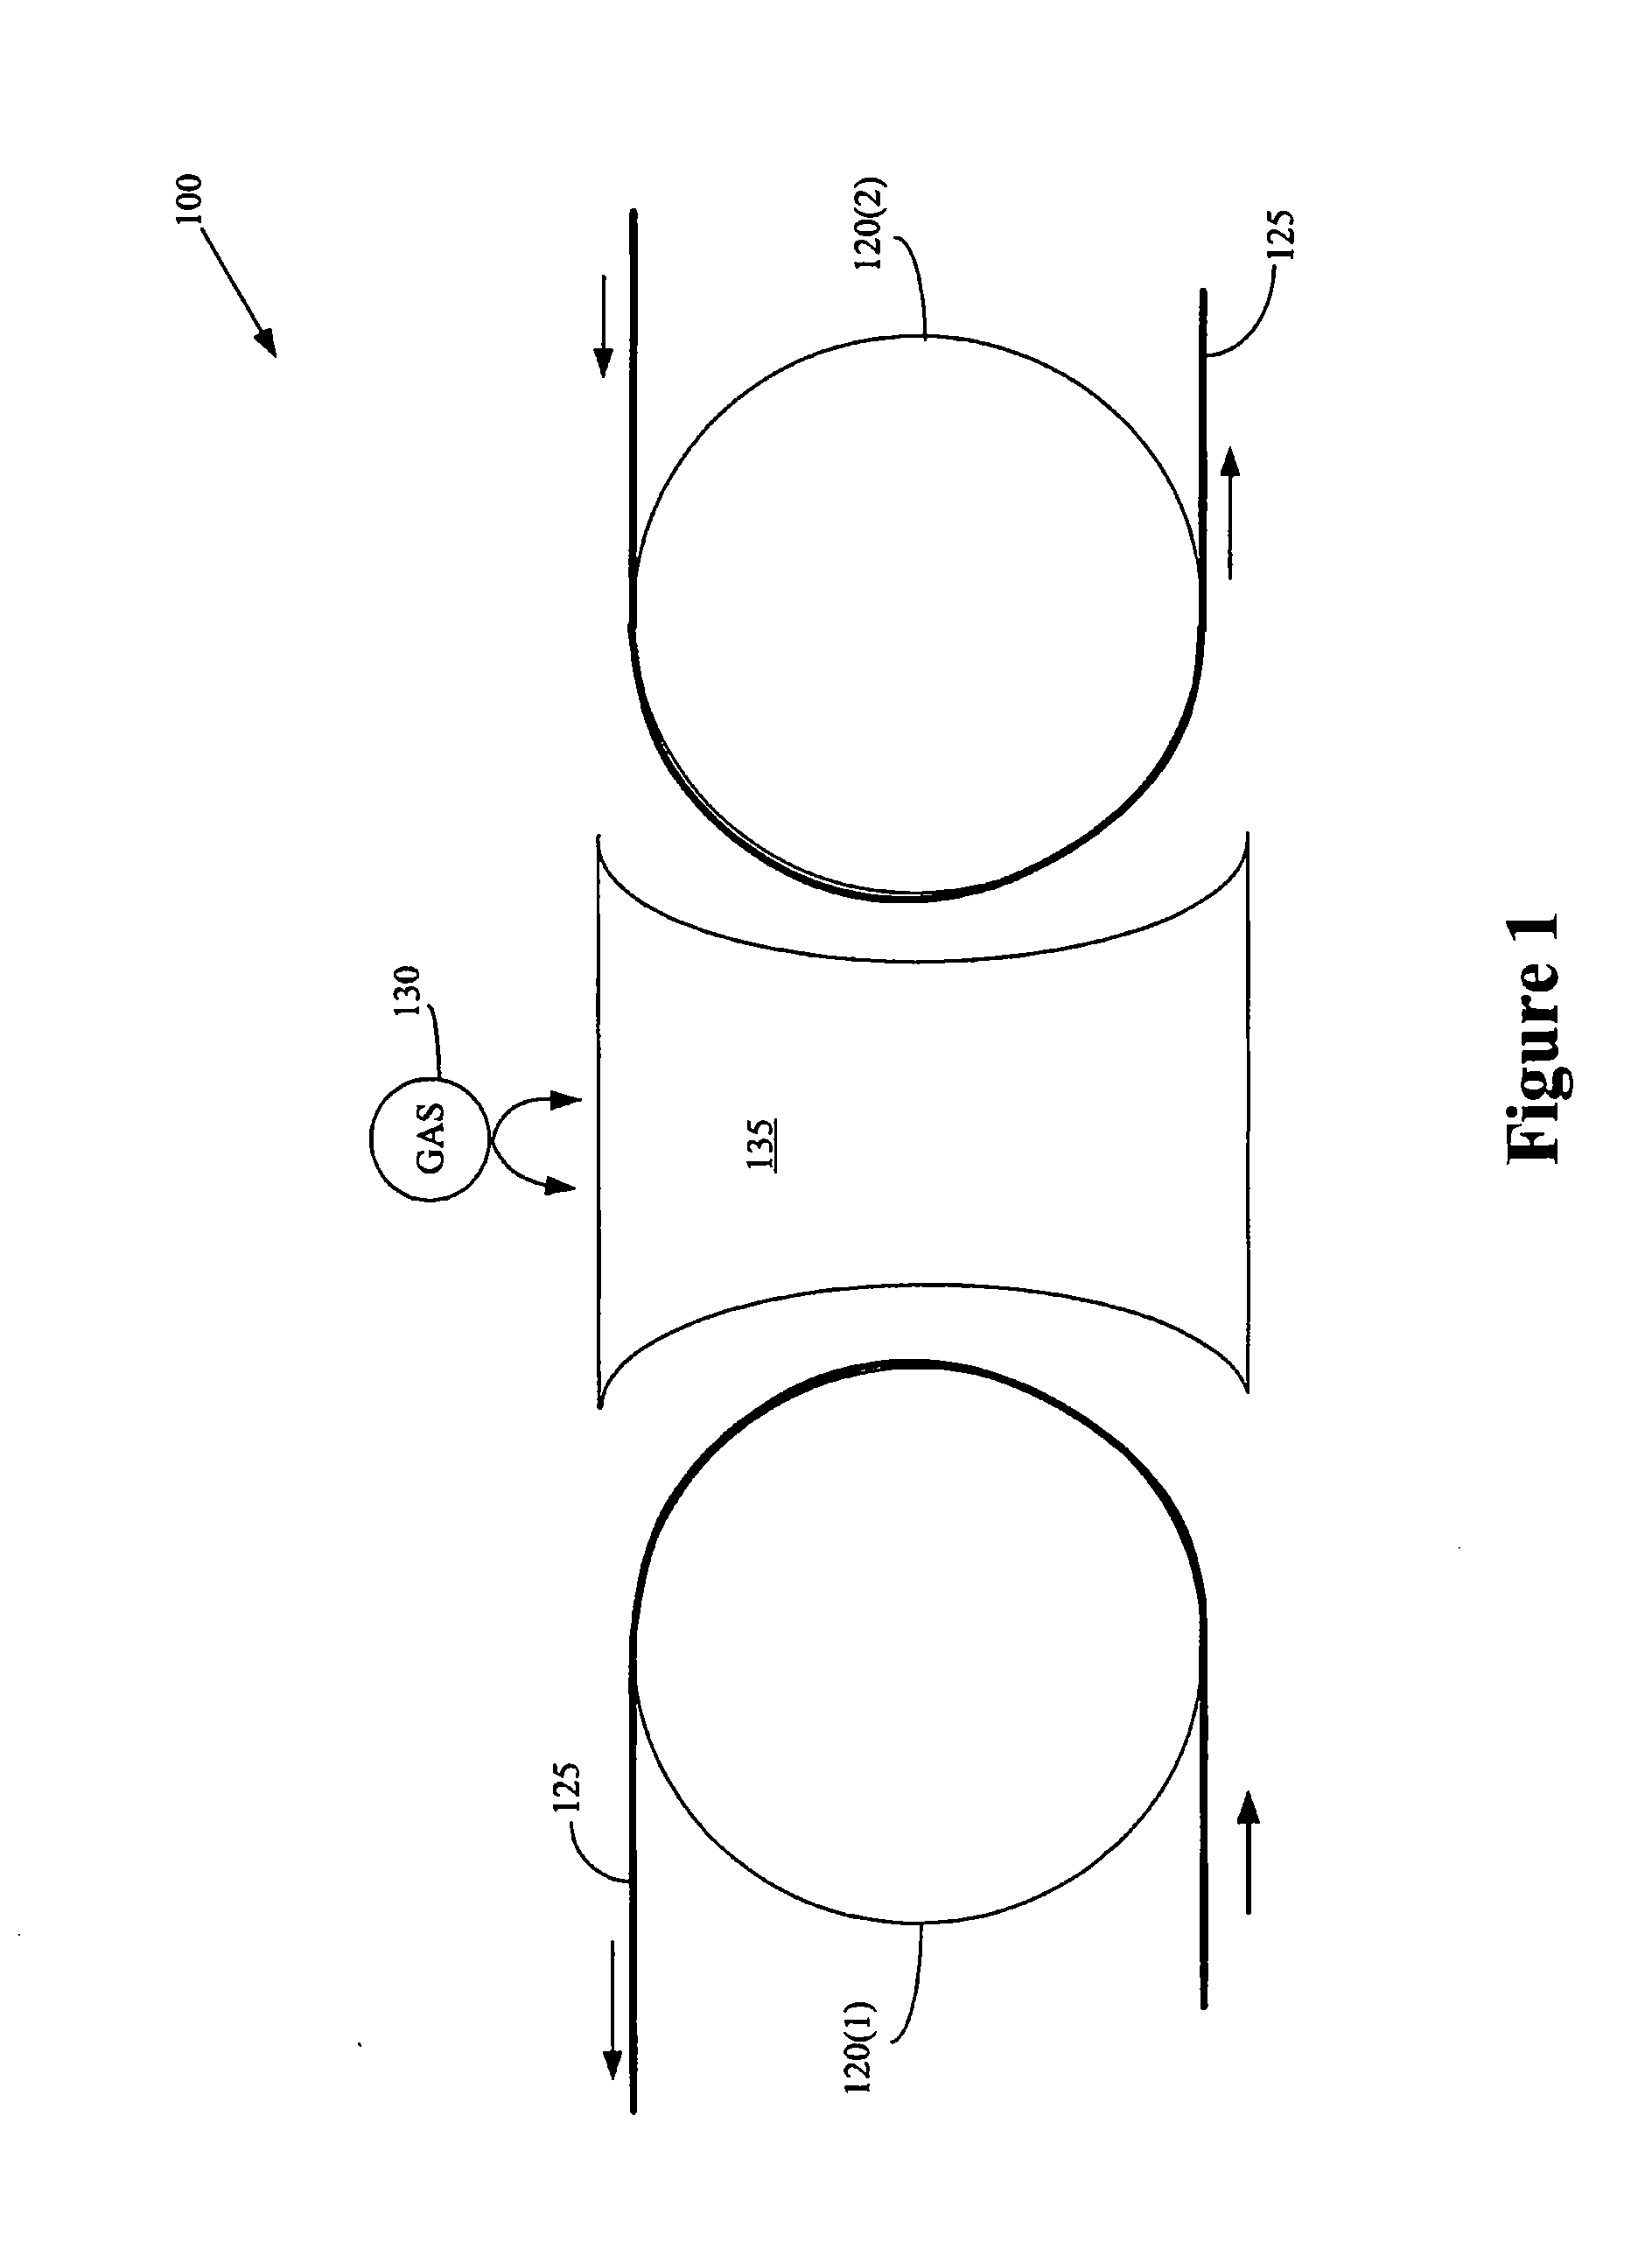 Roll-To-Roll Plasma Enhanced Chemical Vapor Deposition Method of Barrier Layers Comprising Silicon And Carbon